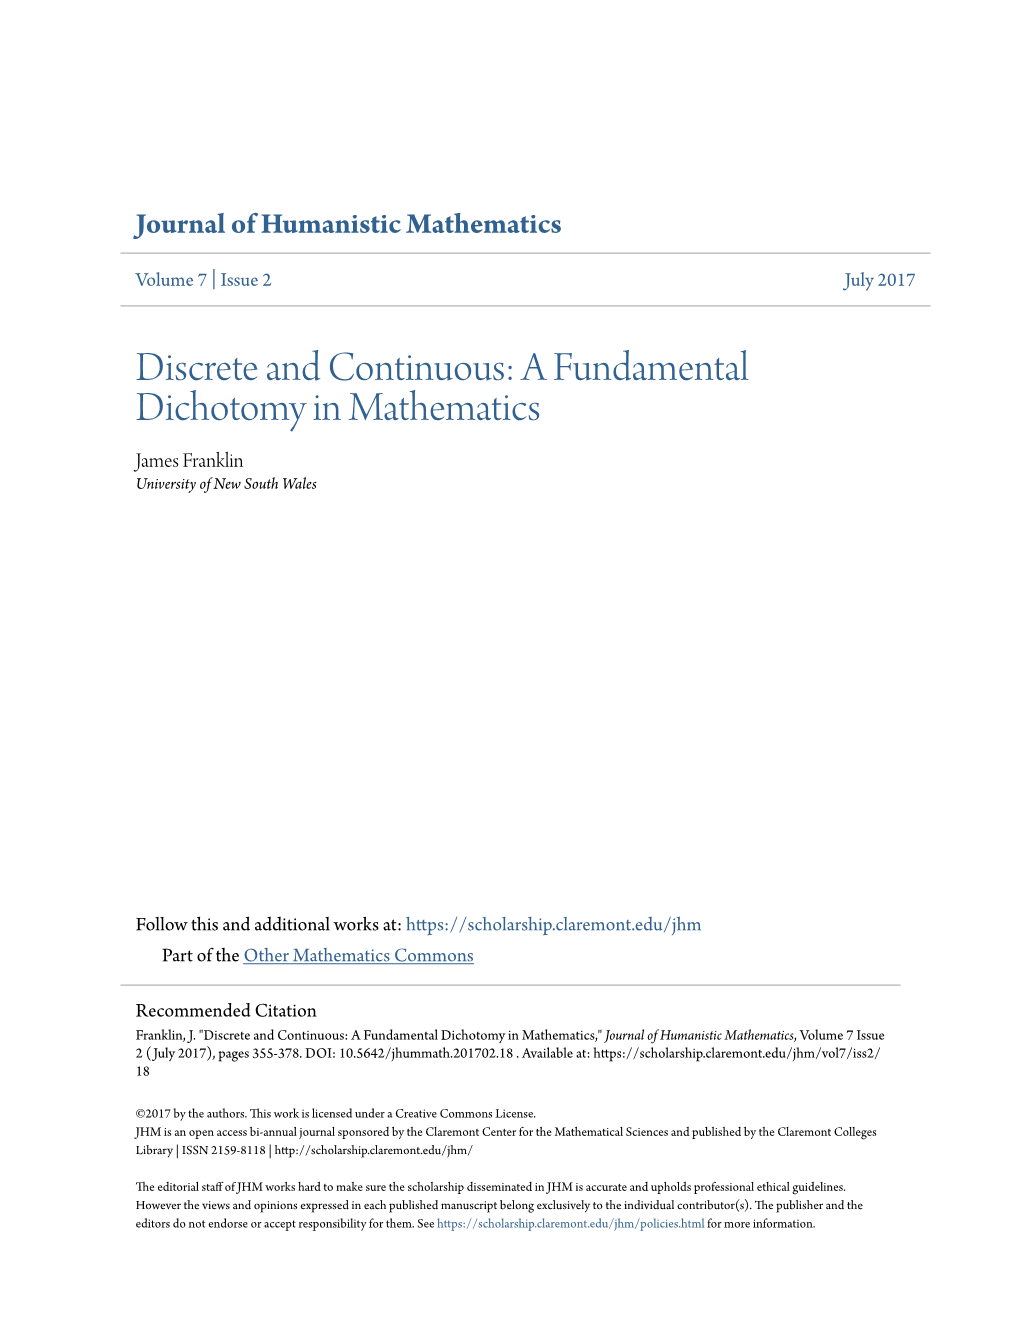 Discrete and Continuous: a Fundamental Dichotomy in Mathematics James Franklin University of New South Wales